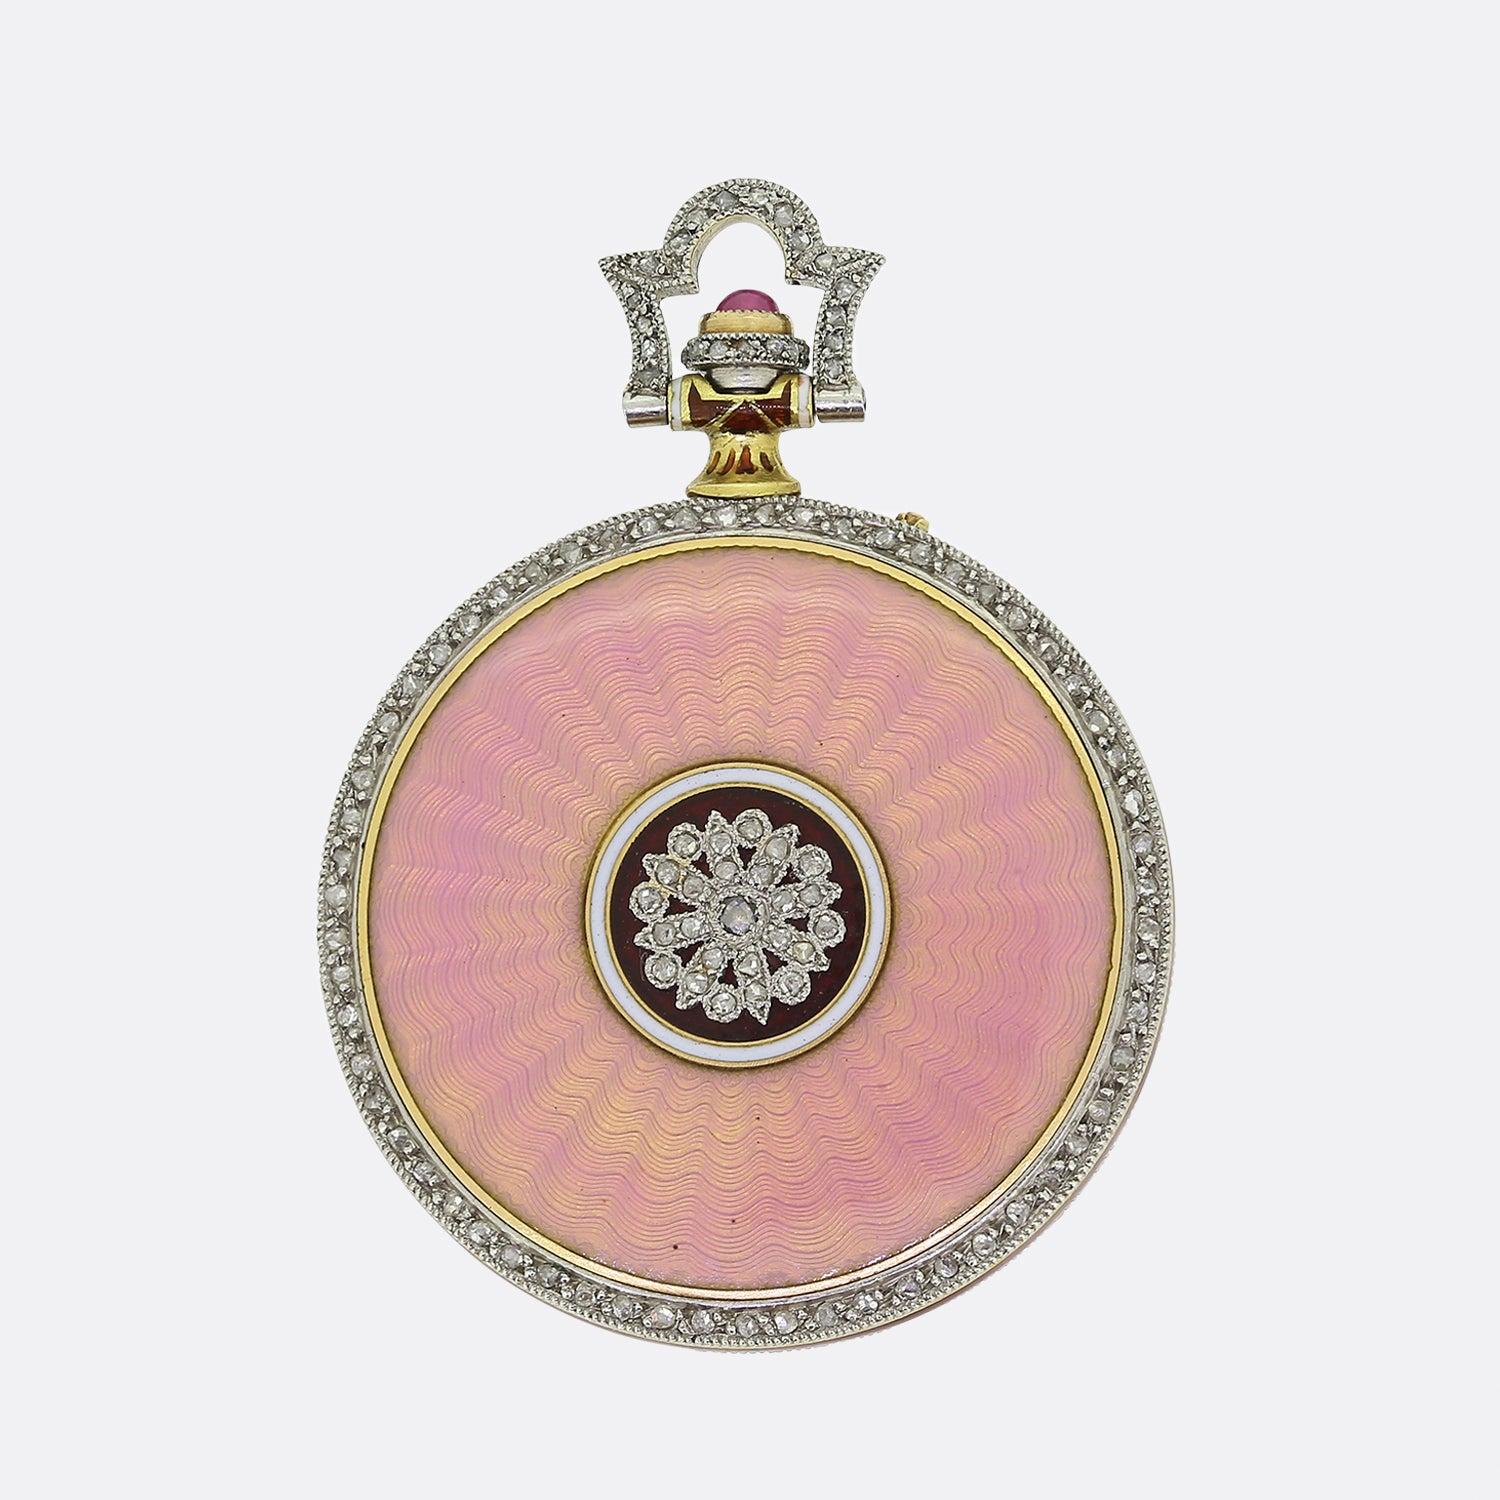 Here we have an outstanding ladies pocket watch from the world renowned luxury jewellery designer, Chaumet. This piece was crafted from 18ct gold at a time when the Art Deco style was at the height of design. A golden coloured dial is circulated,